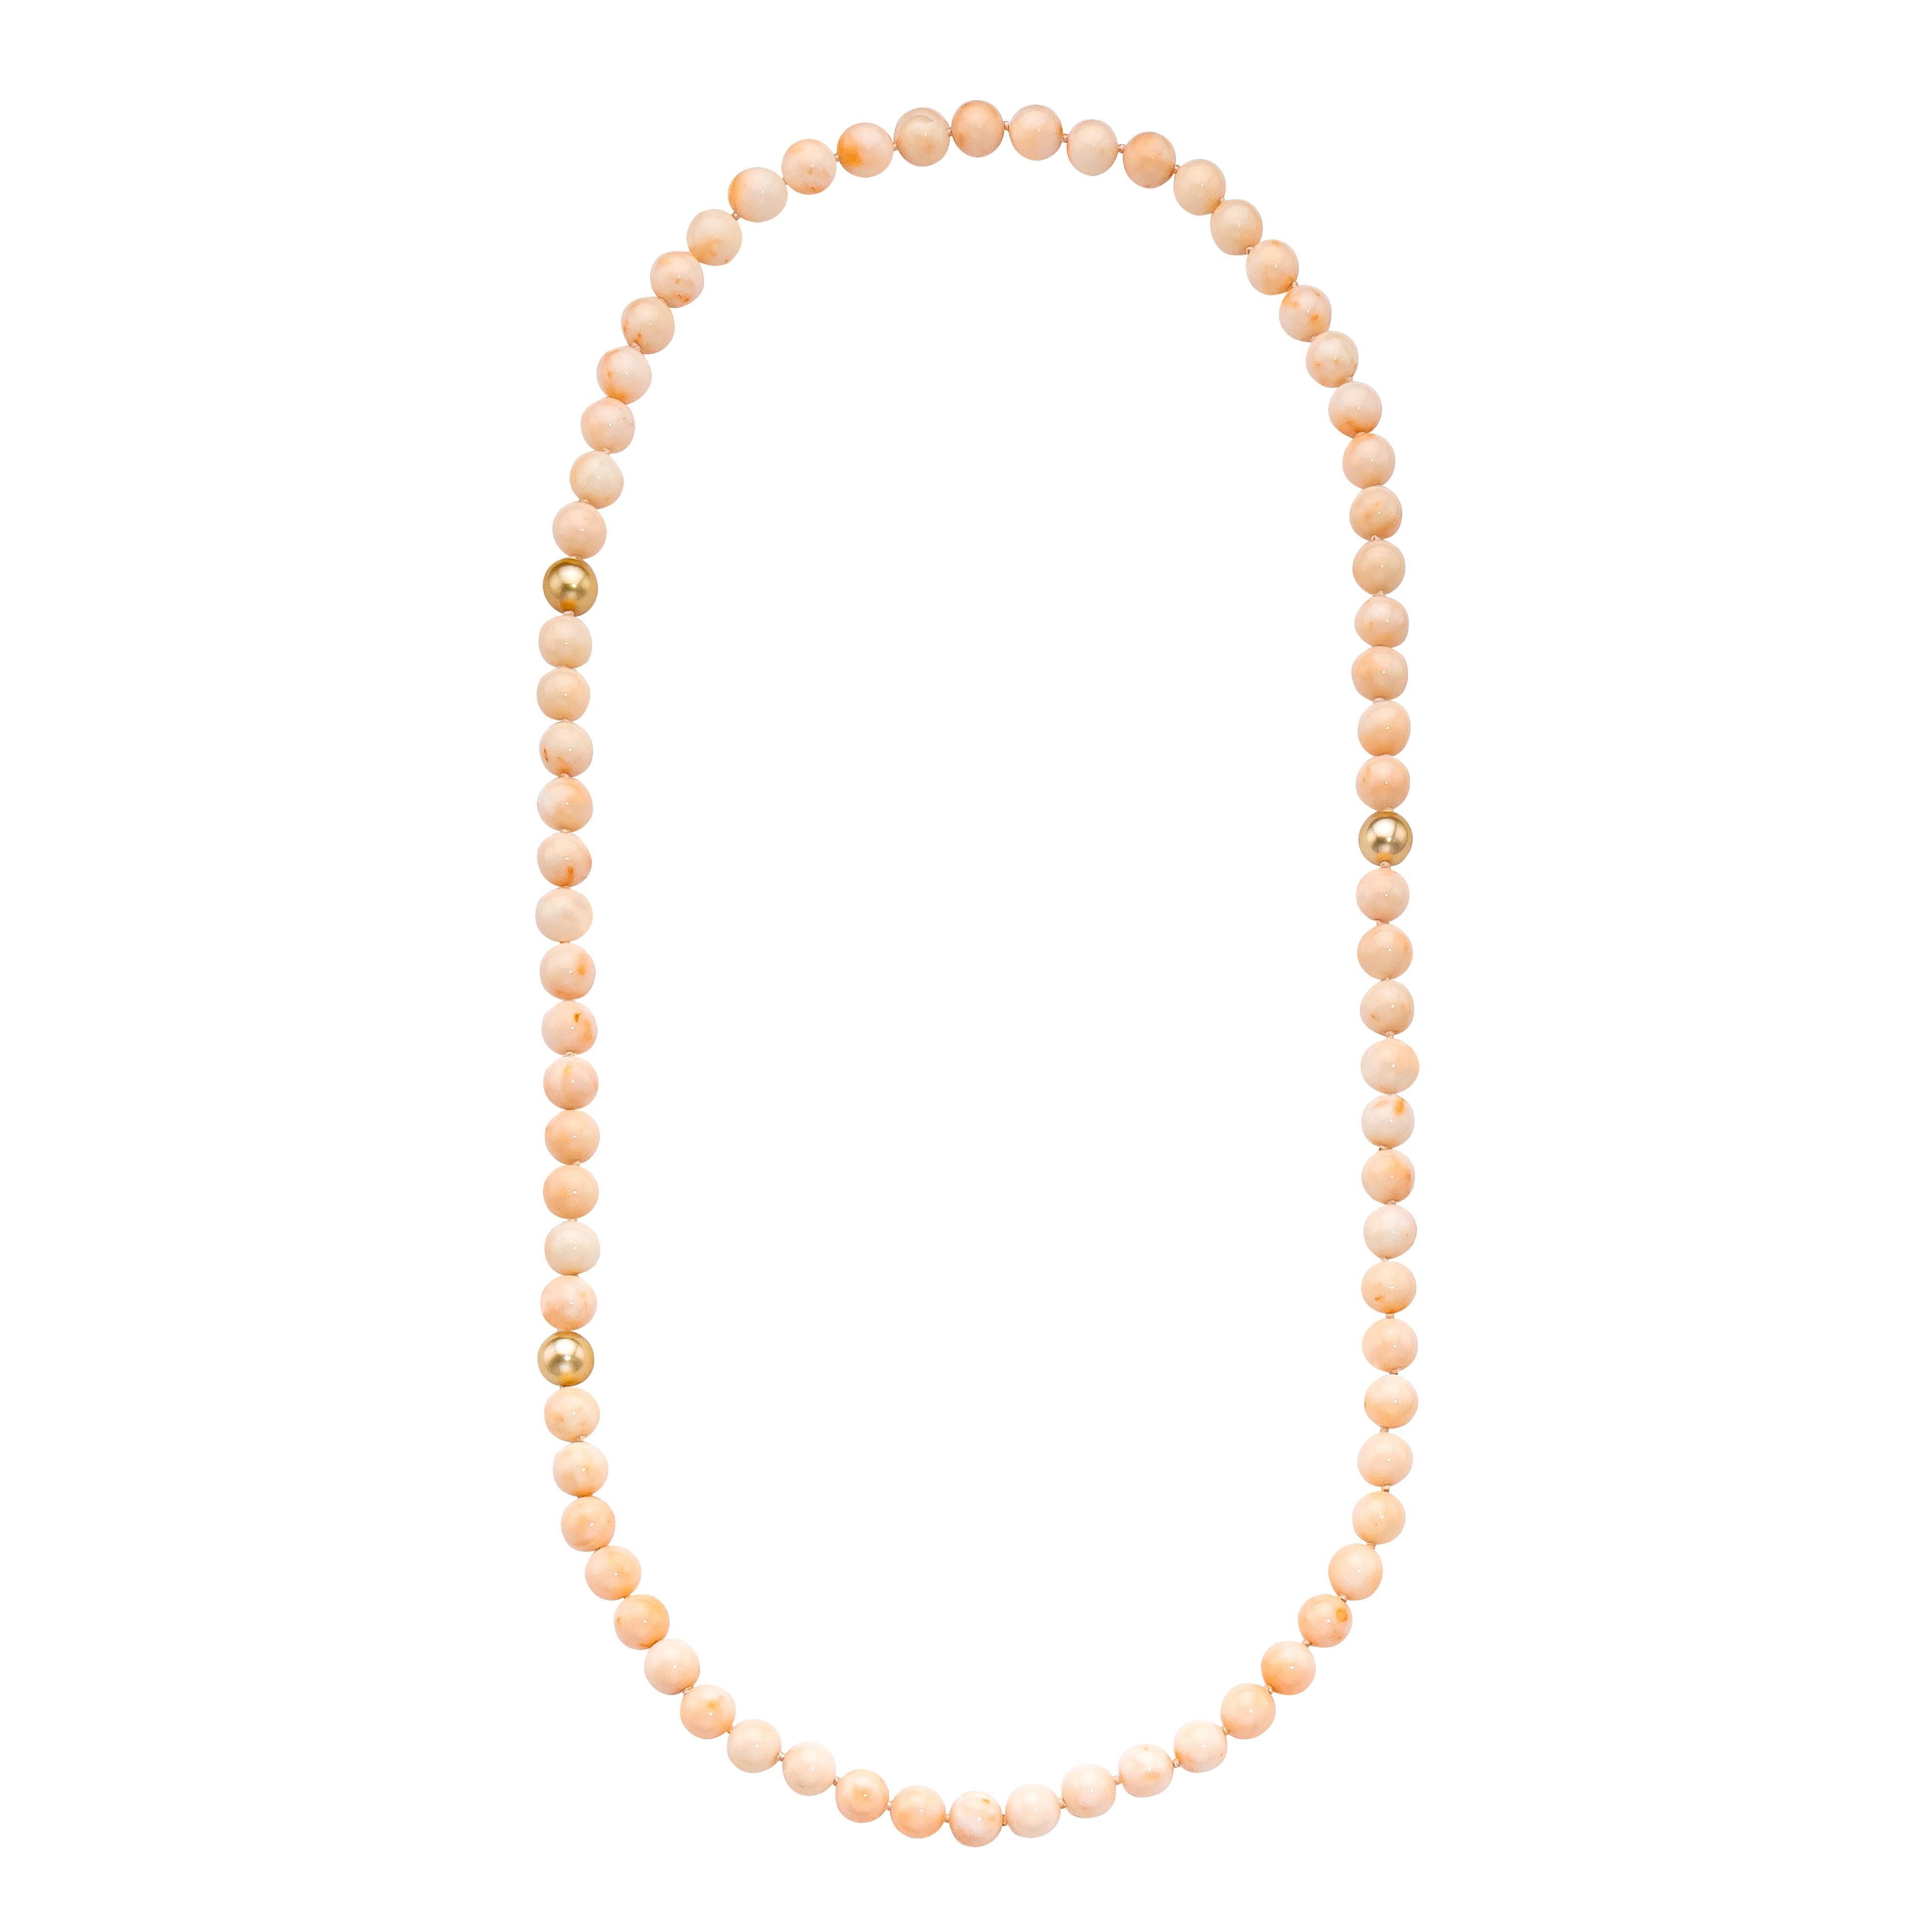 Rare and Stunning!  Vintage Angel Skin Coral paired with the warm tones of South Sea Golden Pearls.  Hand-knotted endless strand style.

Necklace Details

(3) 12 mm South Sea Golden Pearls
     South Sea Report # 1216942903
(73) 12 mm Vintage Angel